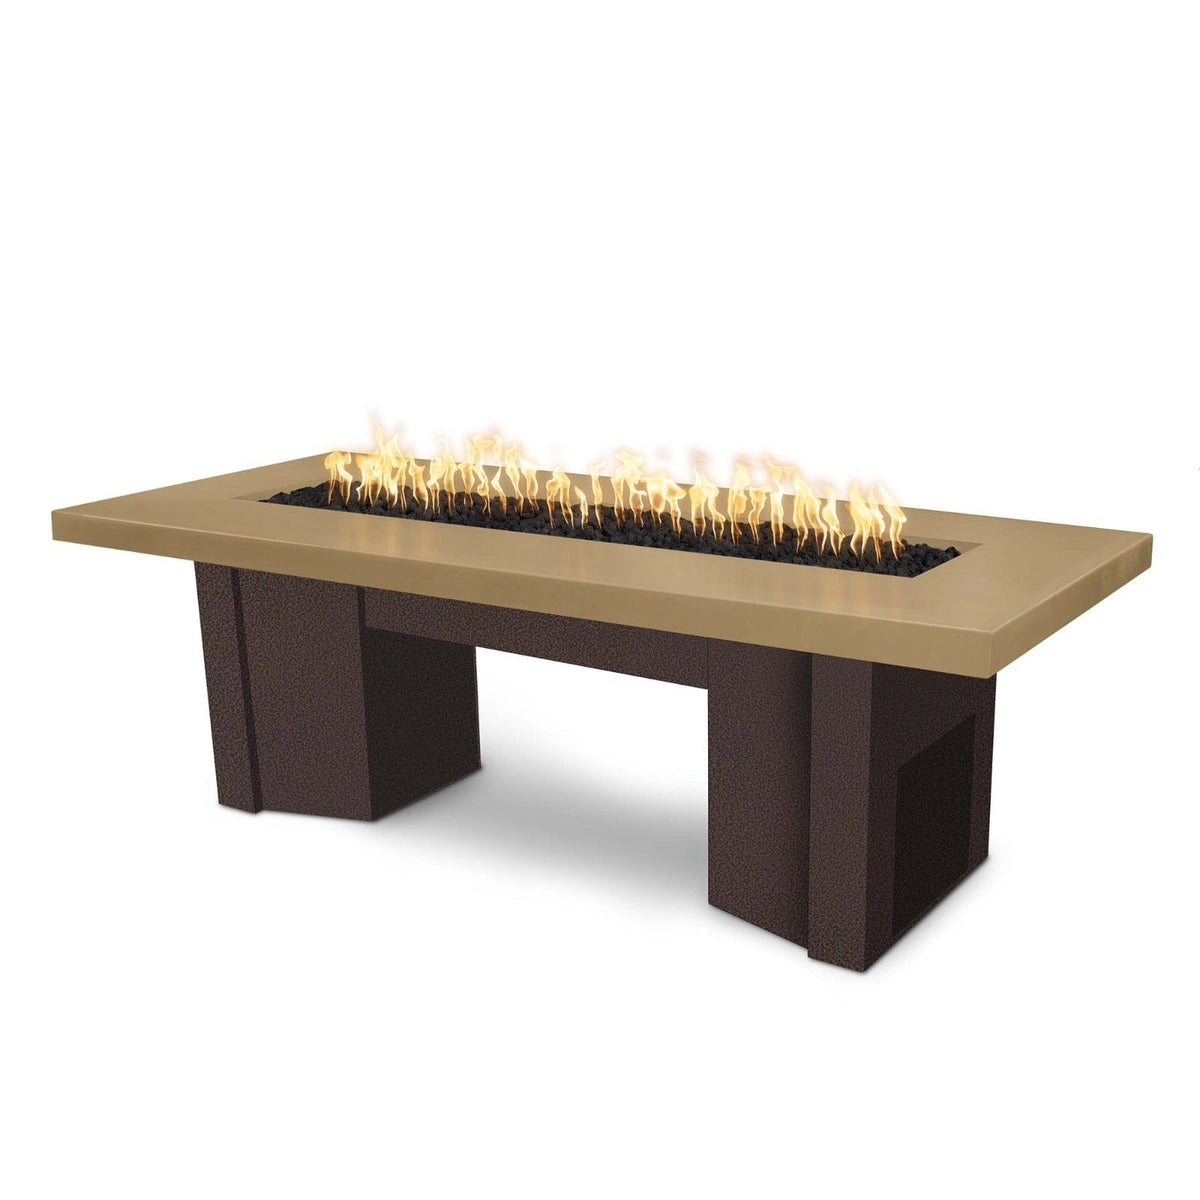 The Outdoor Plus Fire Features Brown (-BRN) / Copper Vein Powder Coated Steel (-CPV) The Outdoor Plus 78&quot; Alameda Fire Table Smooth Concrete in Liquid Propane - 12V Electronic Ignition / OPT-ALMGFRC78E12V-LP